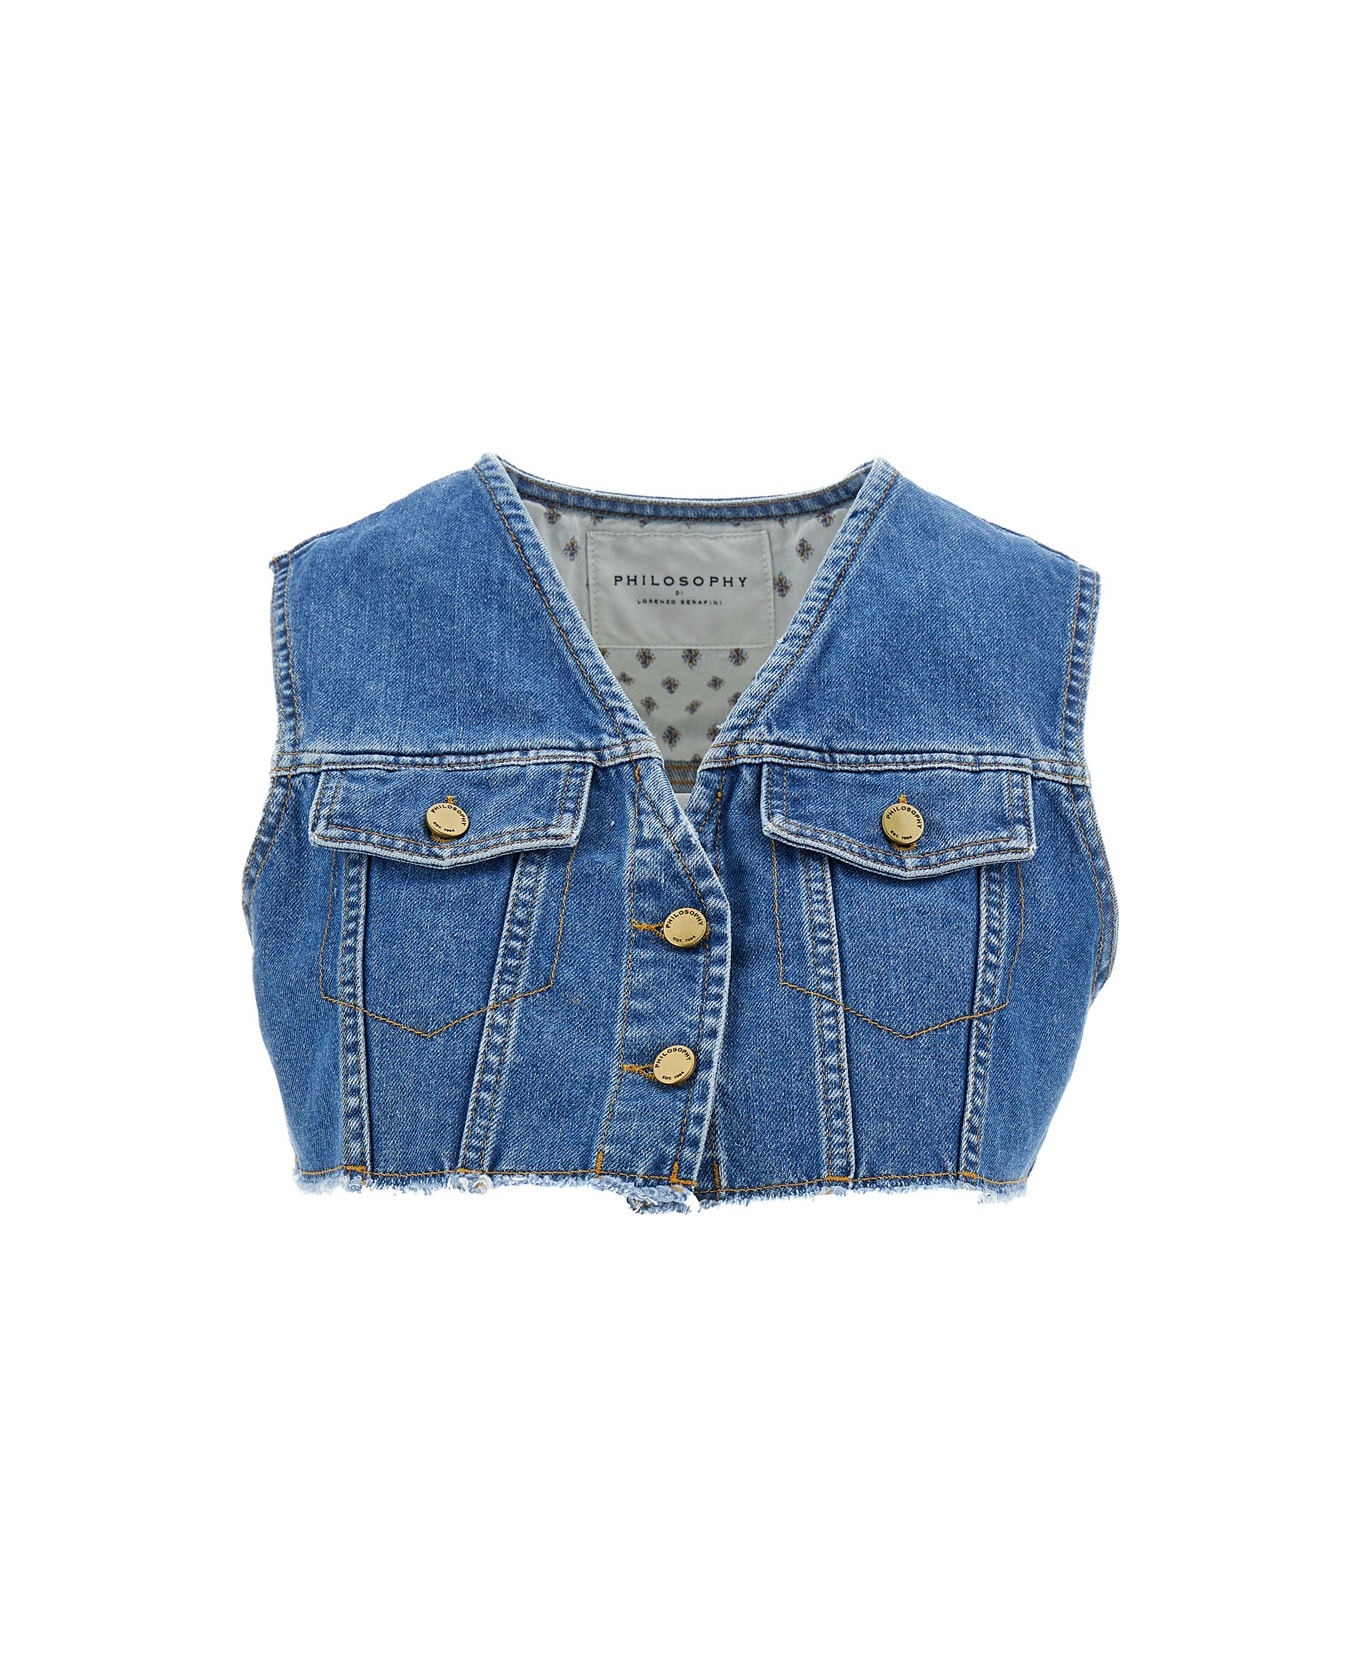 Philosophy di Lorenzo Serafini Light Blue Cropped Vest With Buttons In Cotton Blend Denim Woman - Blu ベスト